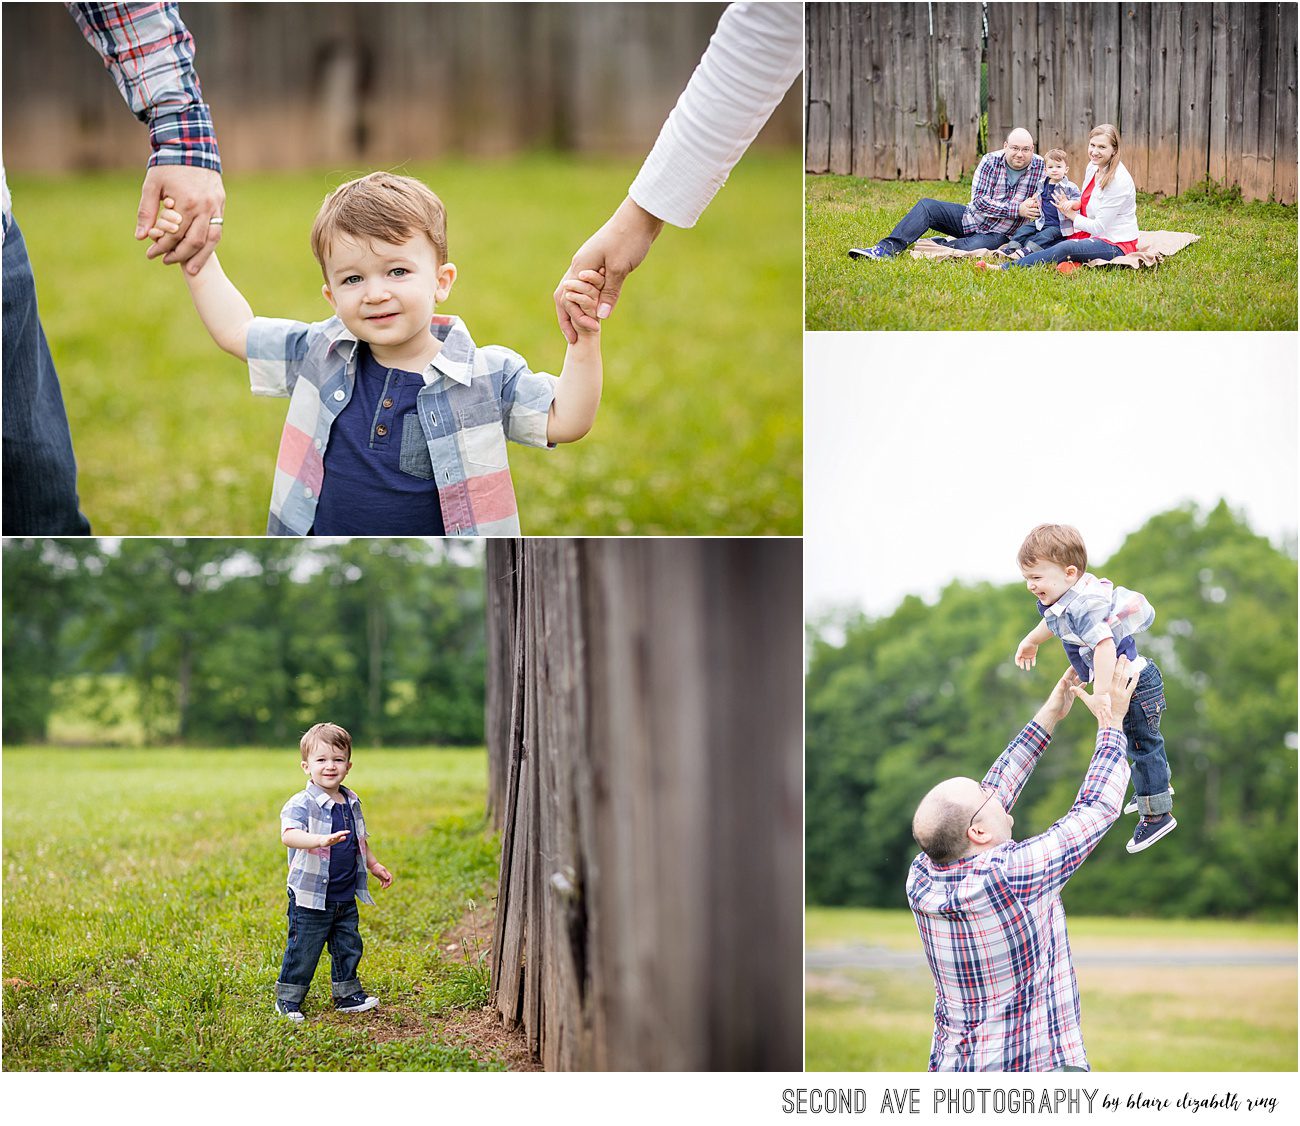 Rustic outdoor barn setting for family photo session, at Morven Park in Leesburg with Northern Virginia family photographer.